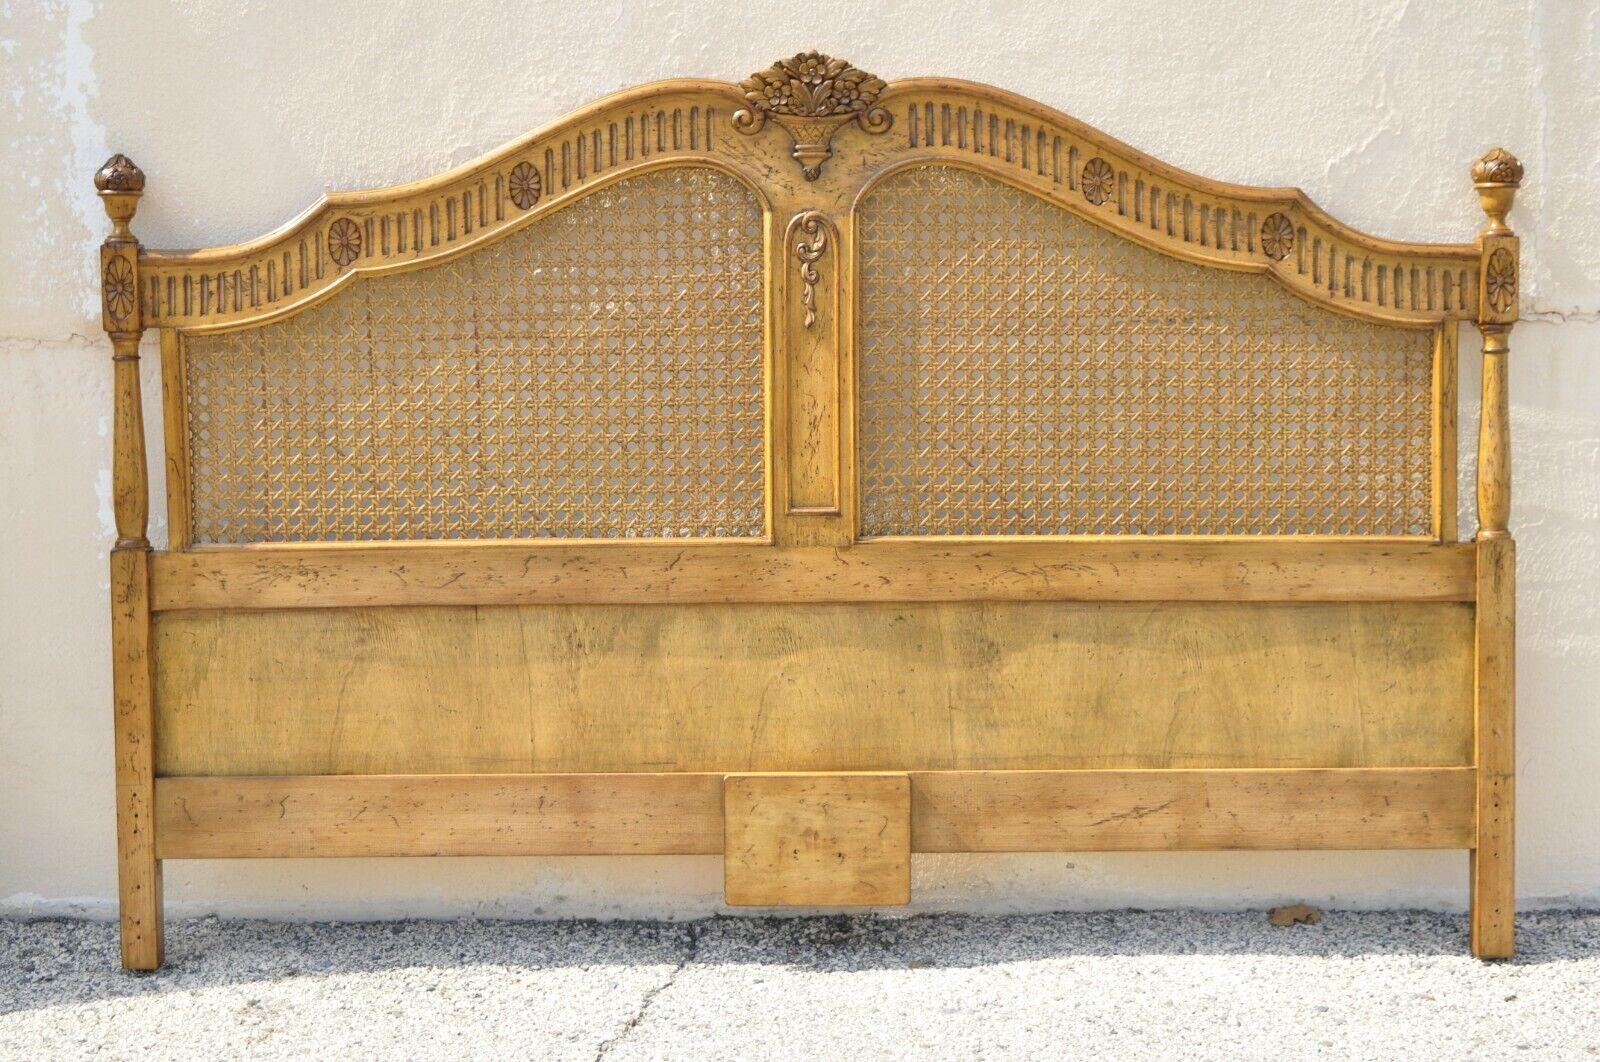 Caning French Country Provincial Style Cane Panel King Size Bed Headboard attr. Karges